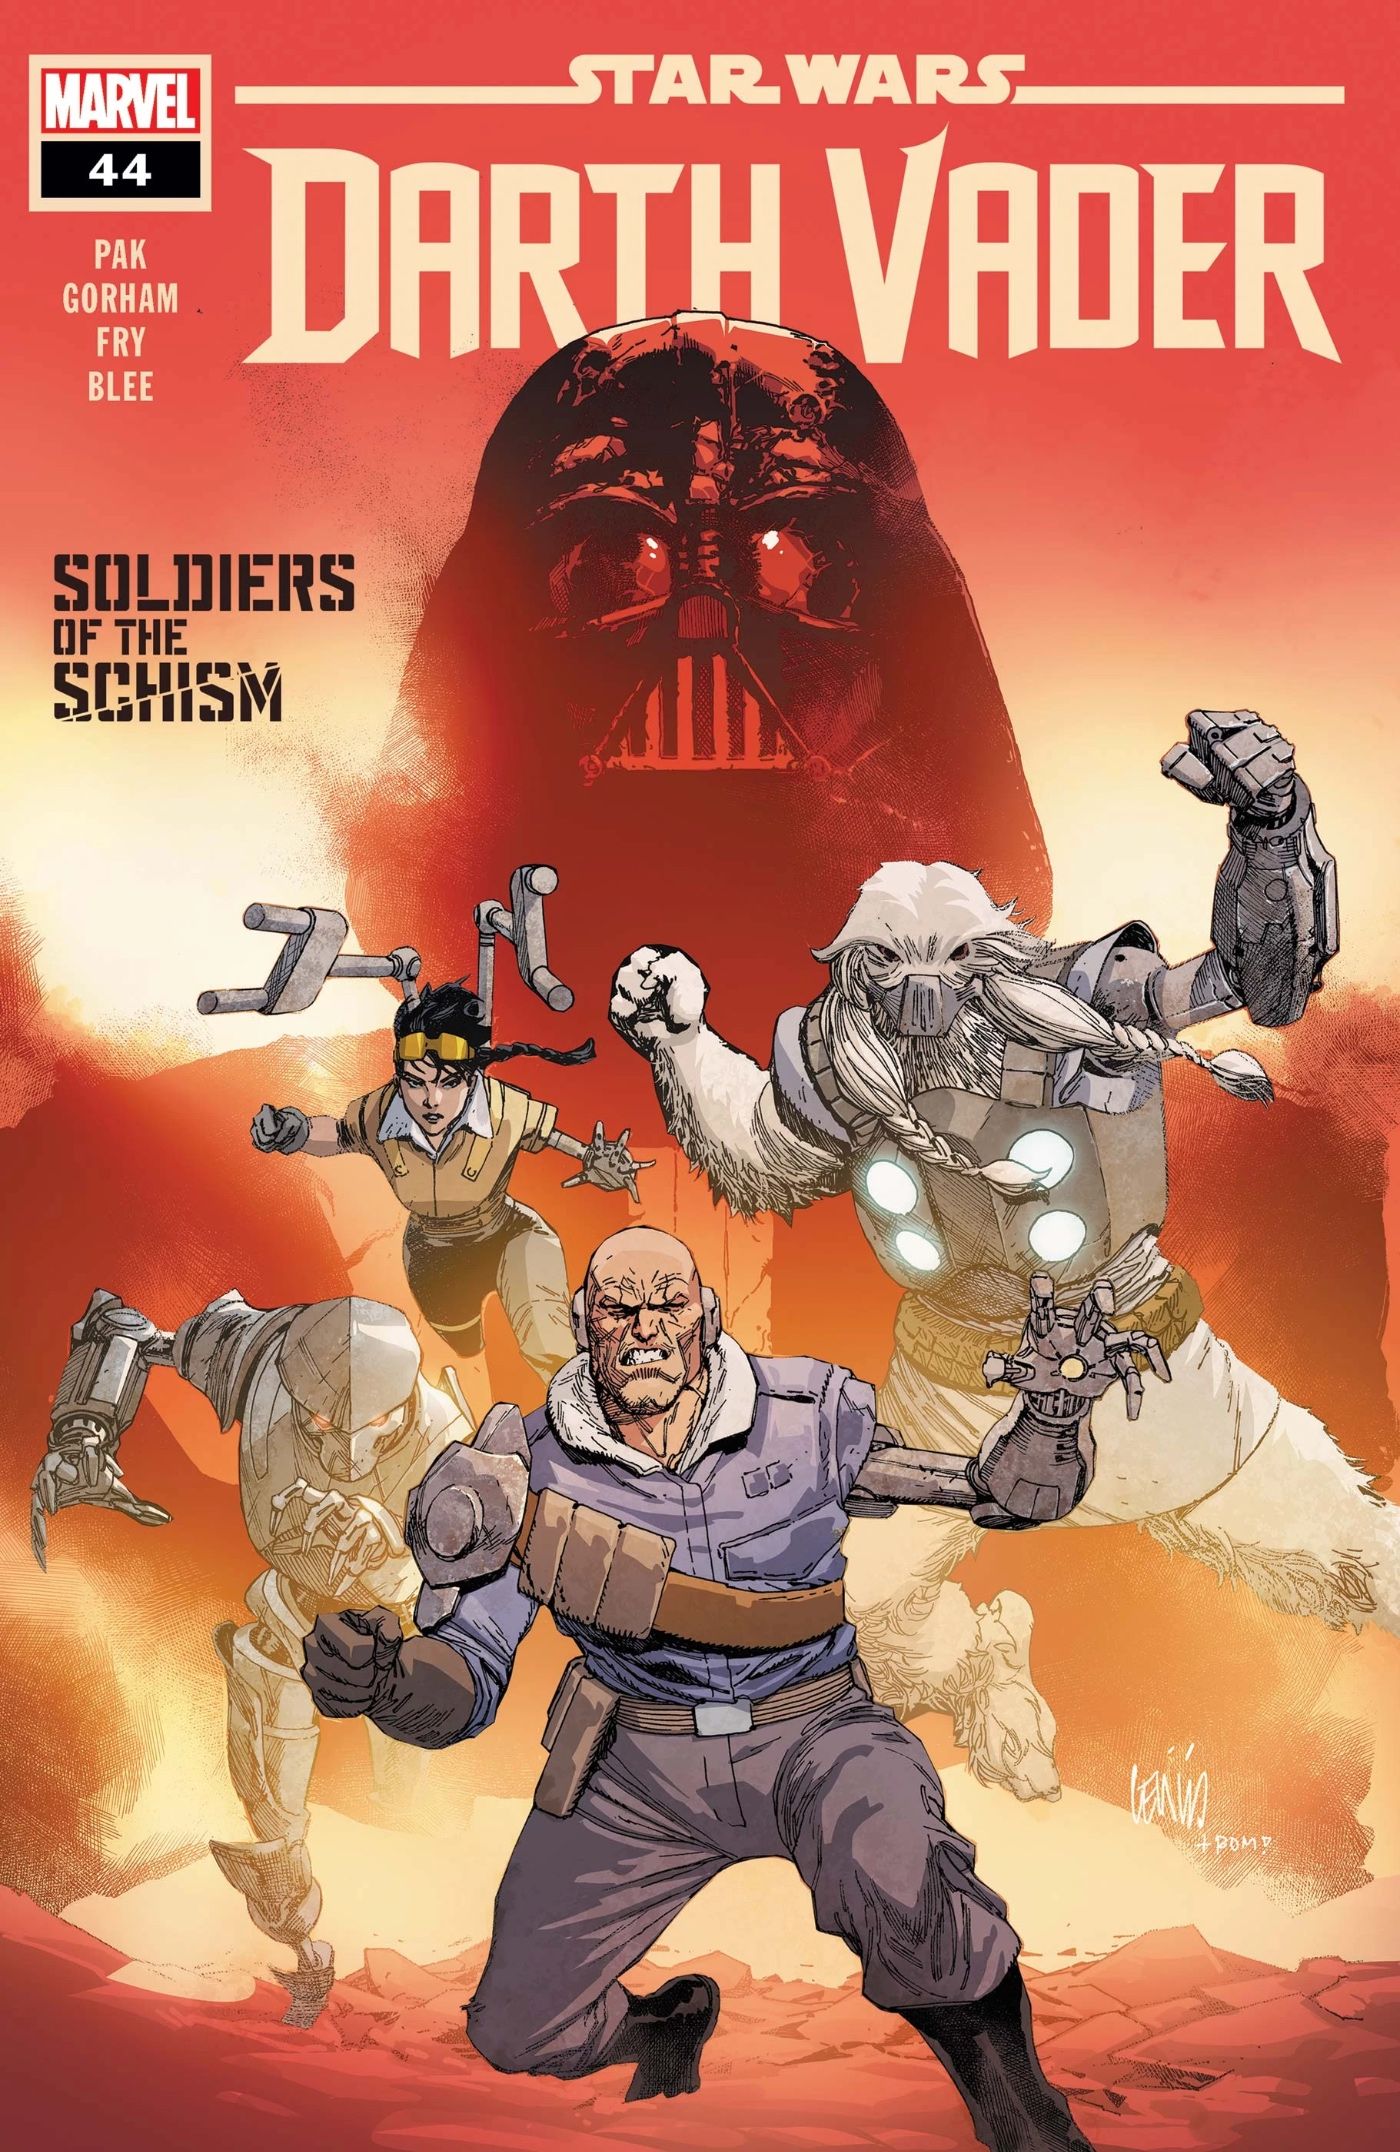 Darth Vader #44 Cover Art With MAR Corps